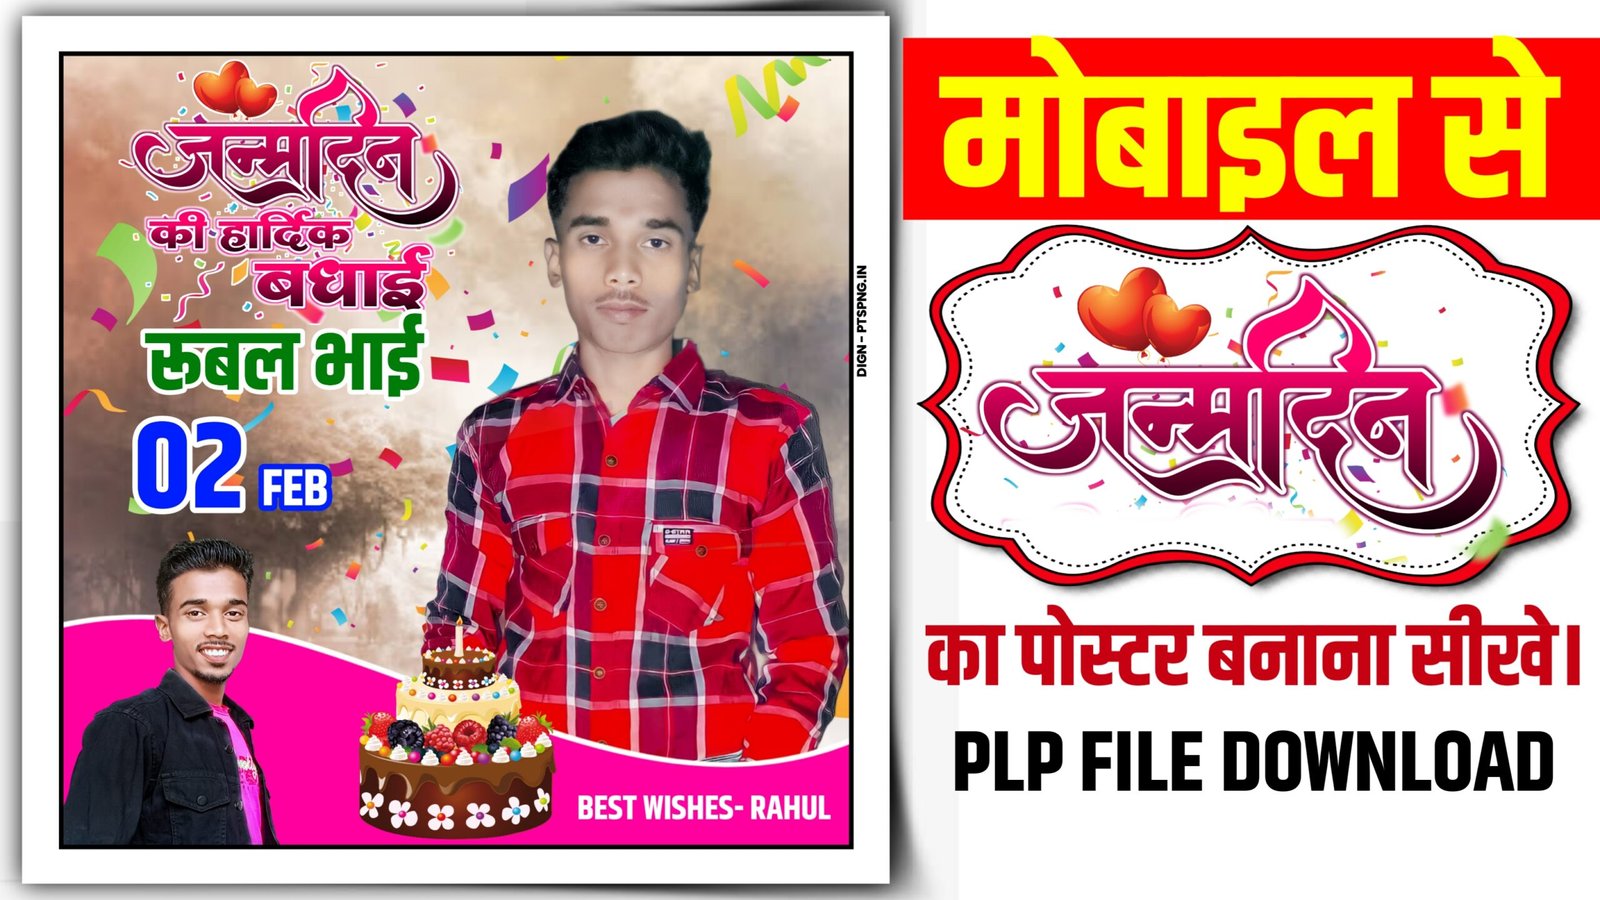 Birthday poster kaise banaen| how to make happy birthday poster| birthday plp kaise download kare